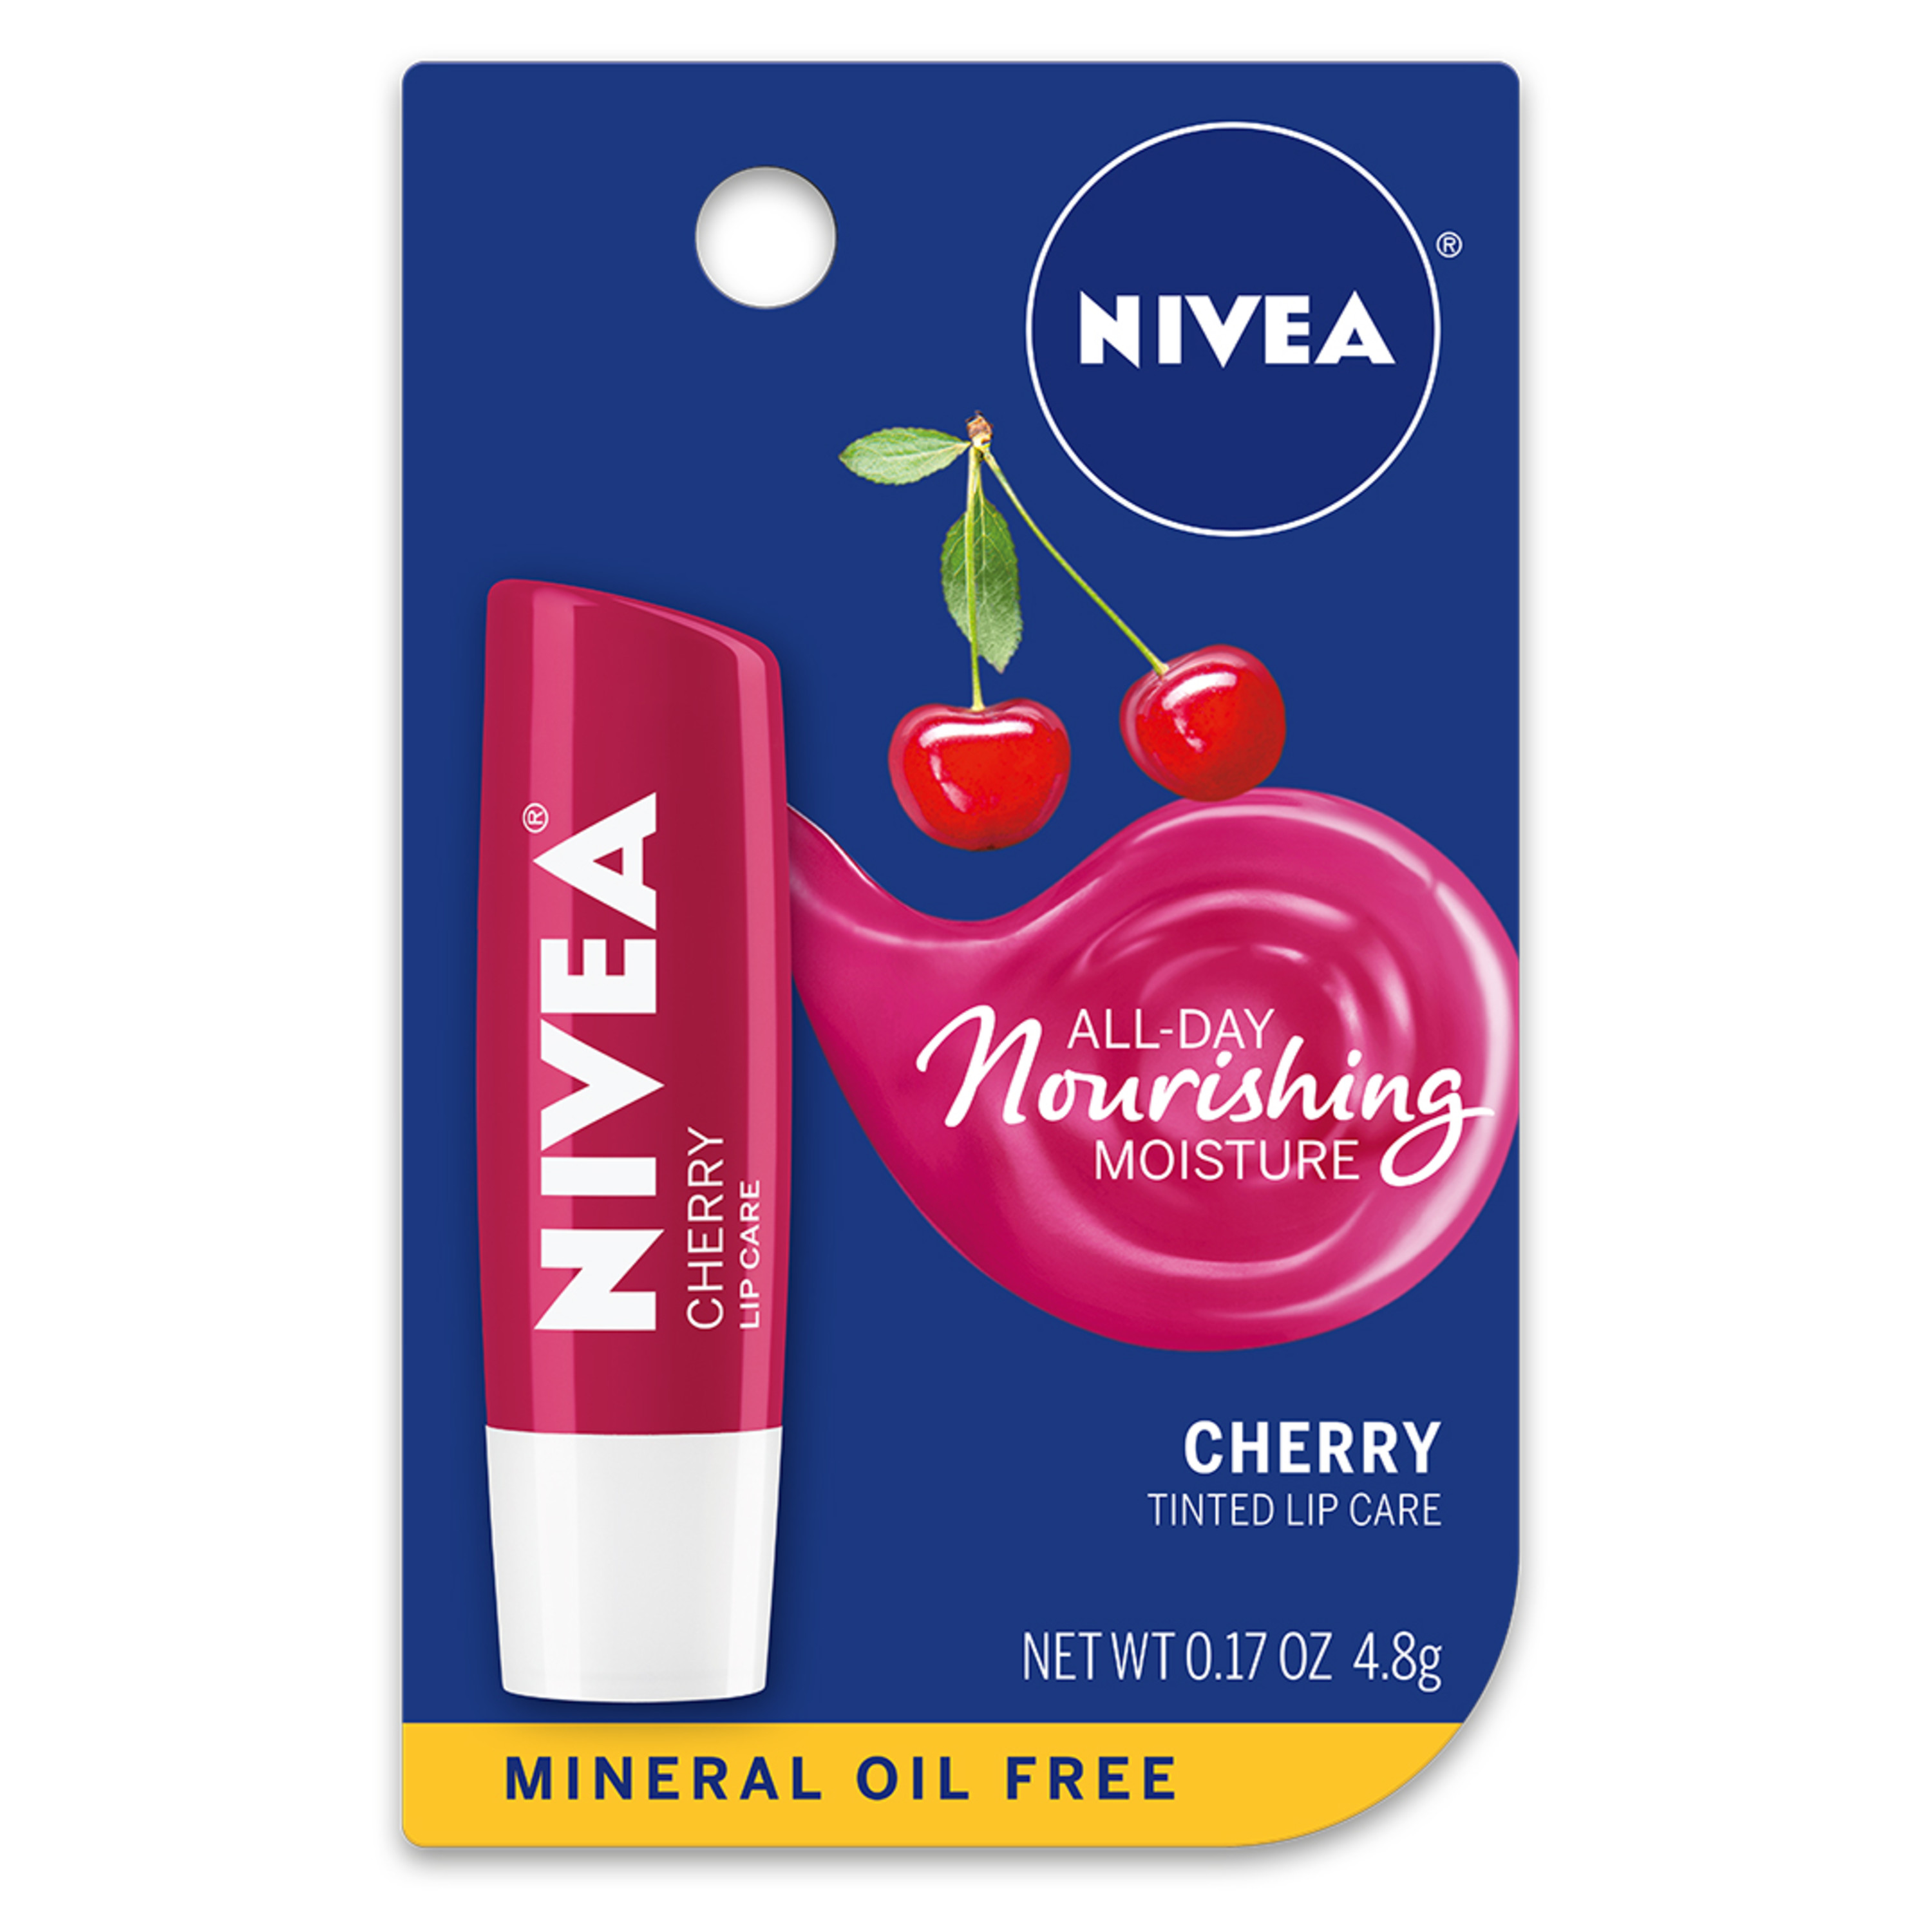 NIVEA Cherry Lip Care 0.17 oz. Carded Pack - image 1 of 5